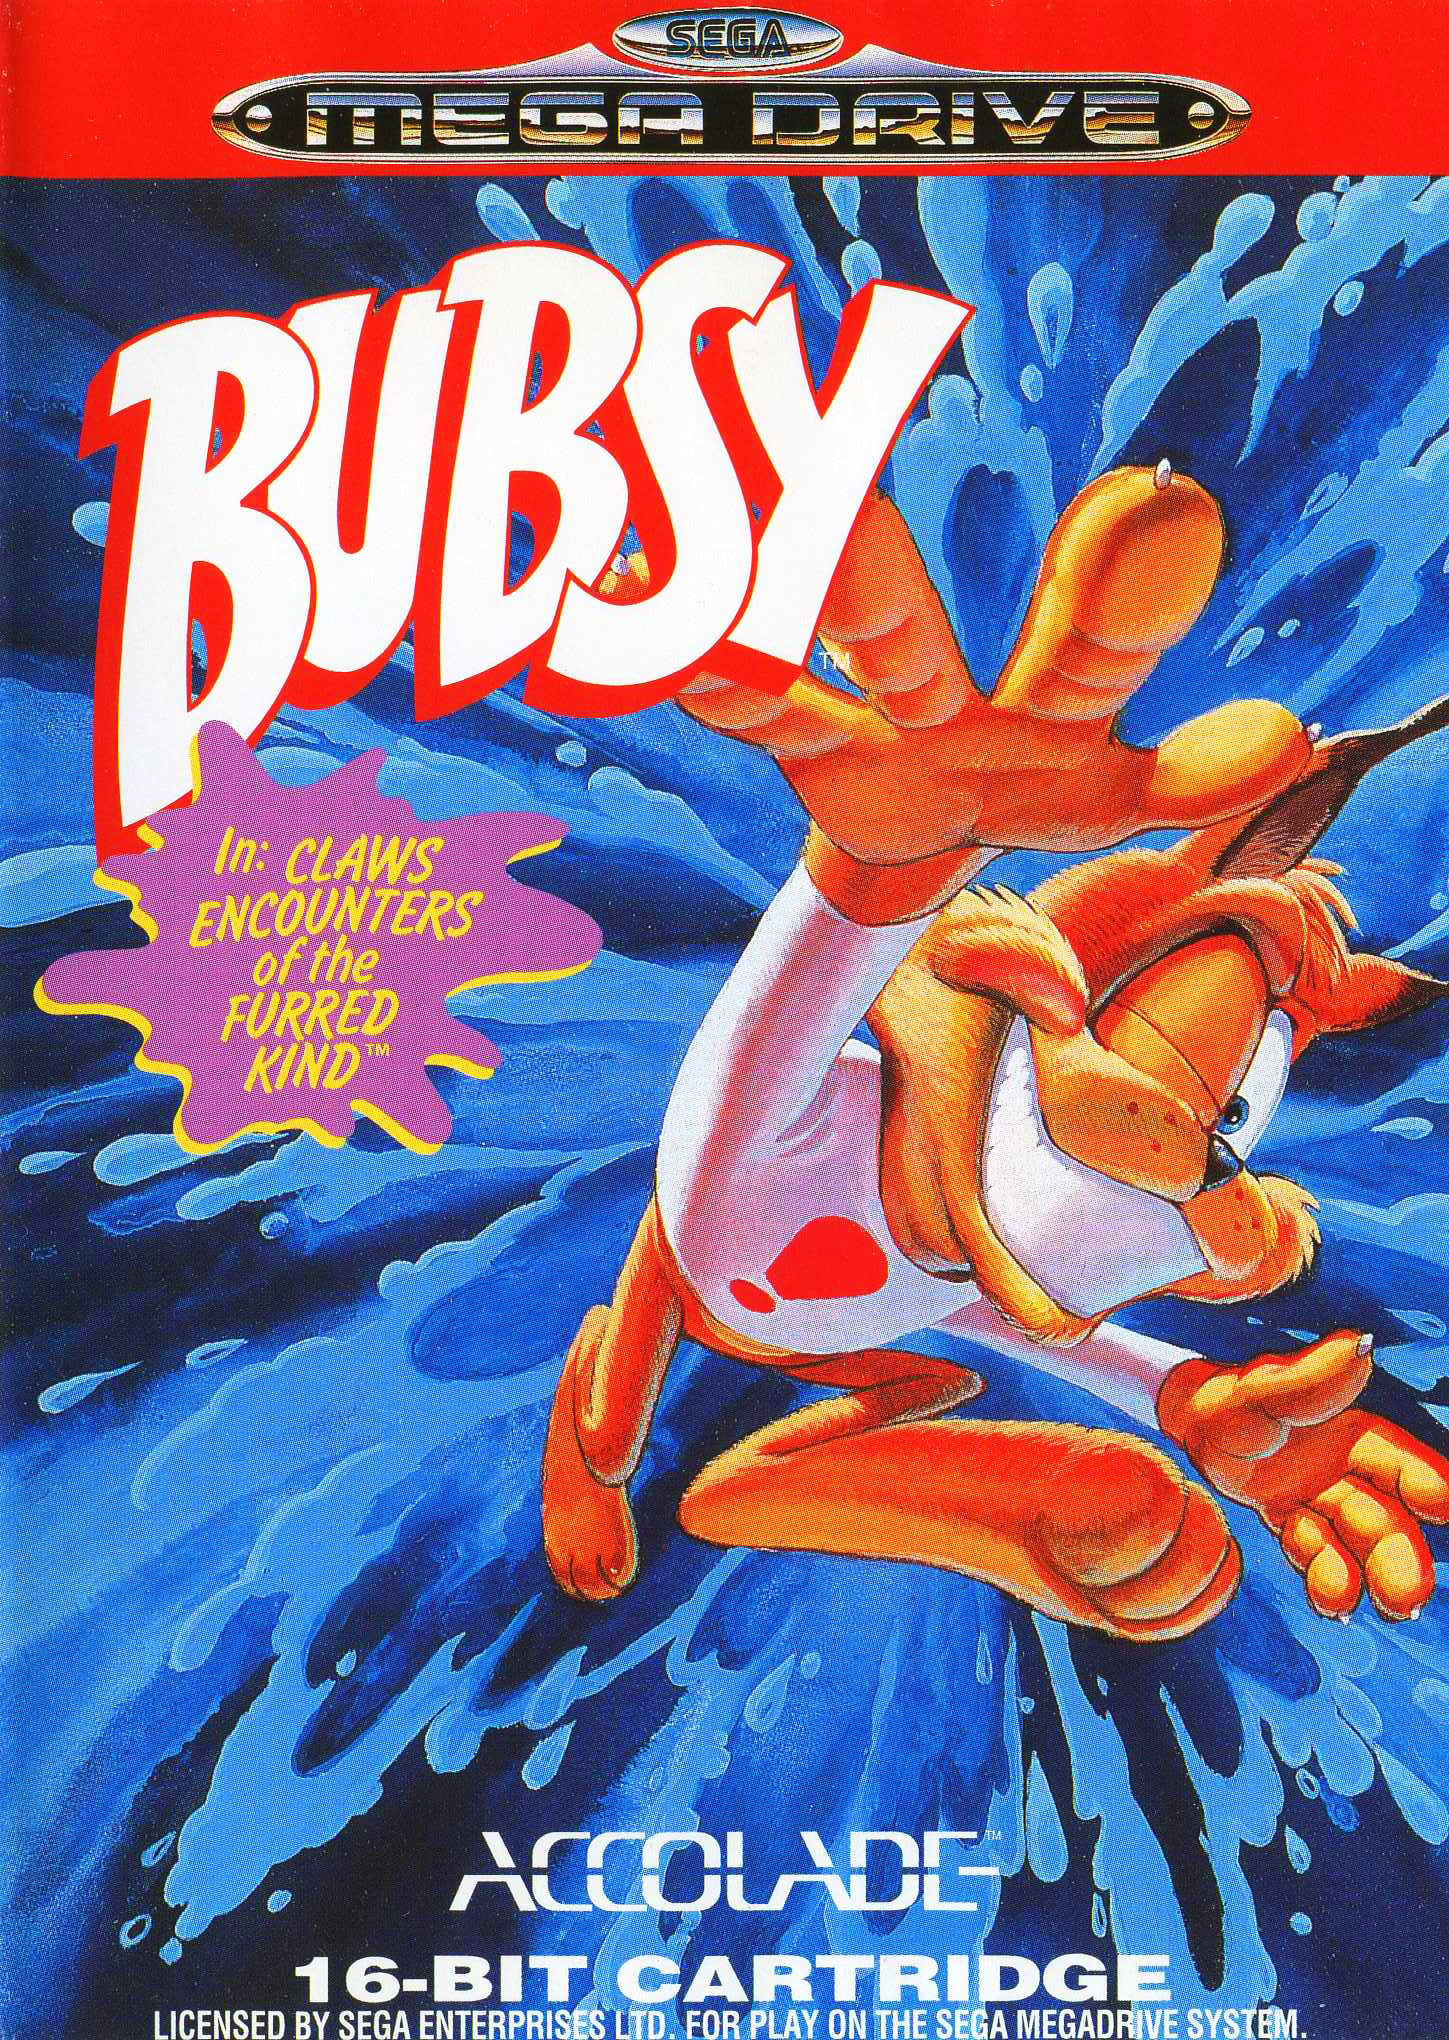 jaquette du jeu vidéo Bubsy in : Claws Encounters of the Furred Kind